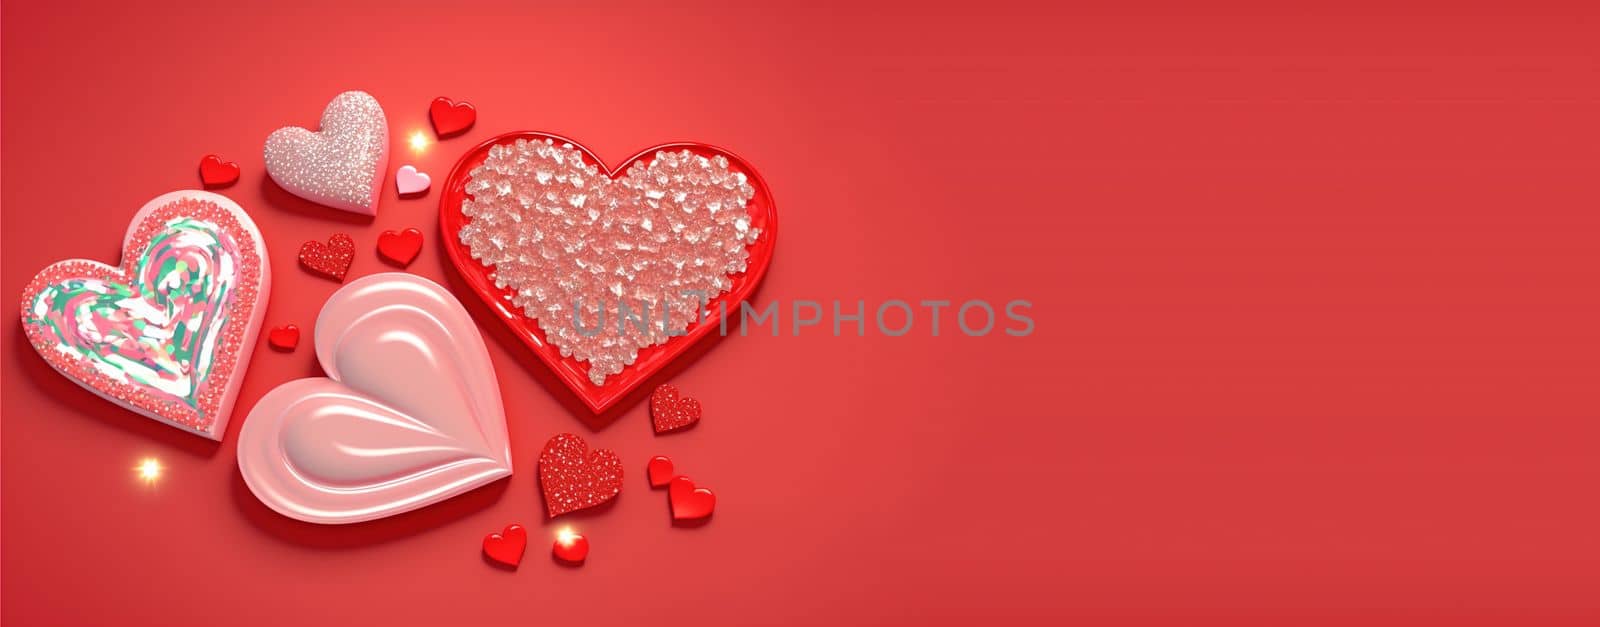 Gorgeous 3D Heart Shape, Diamond, and Crystal Illustration for Valentine's Day Banner